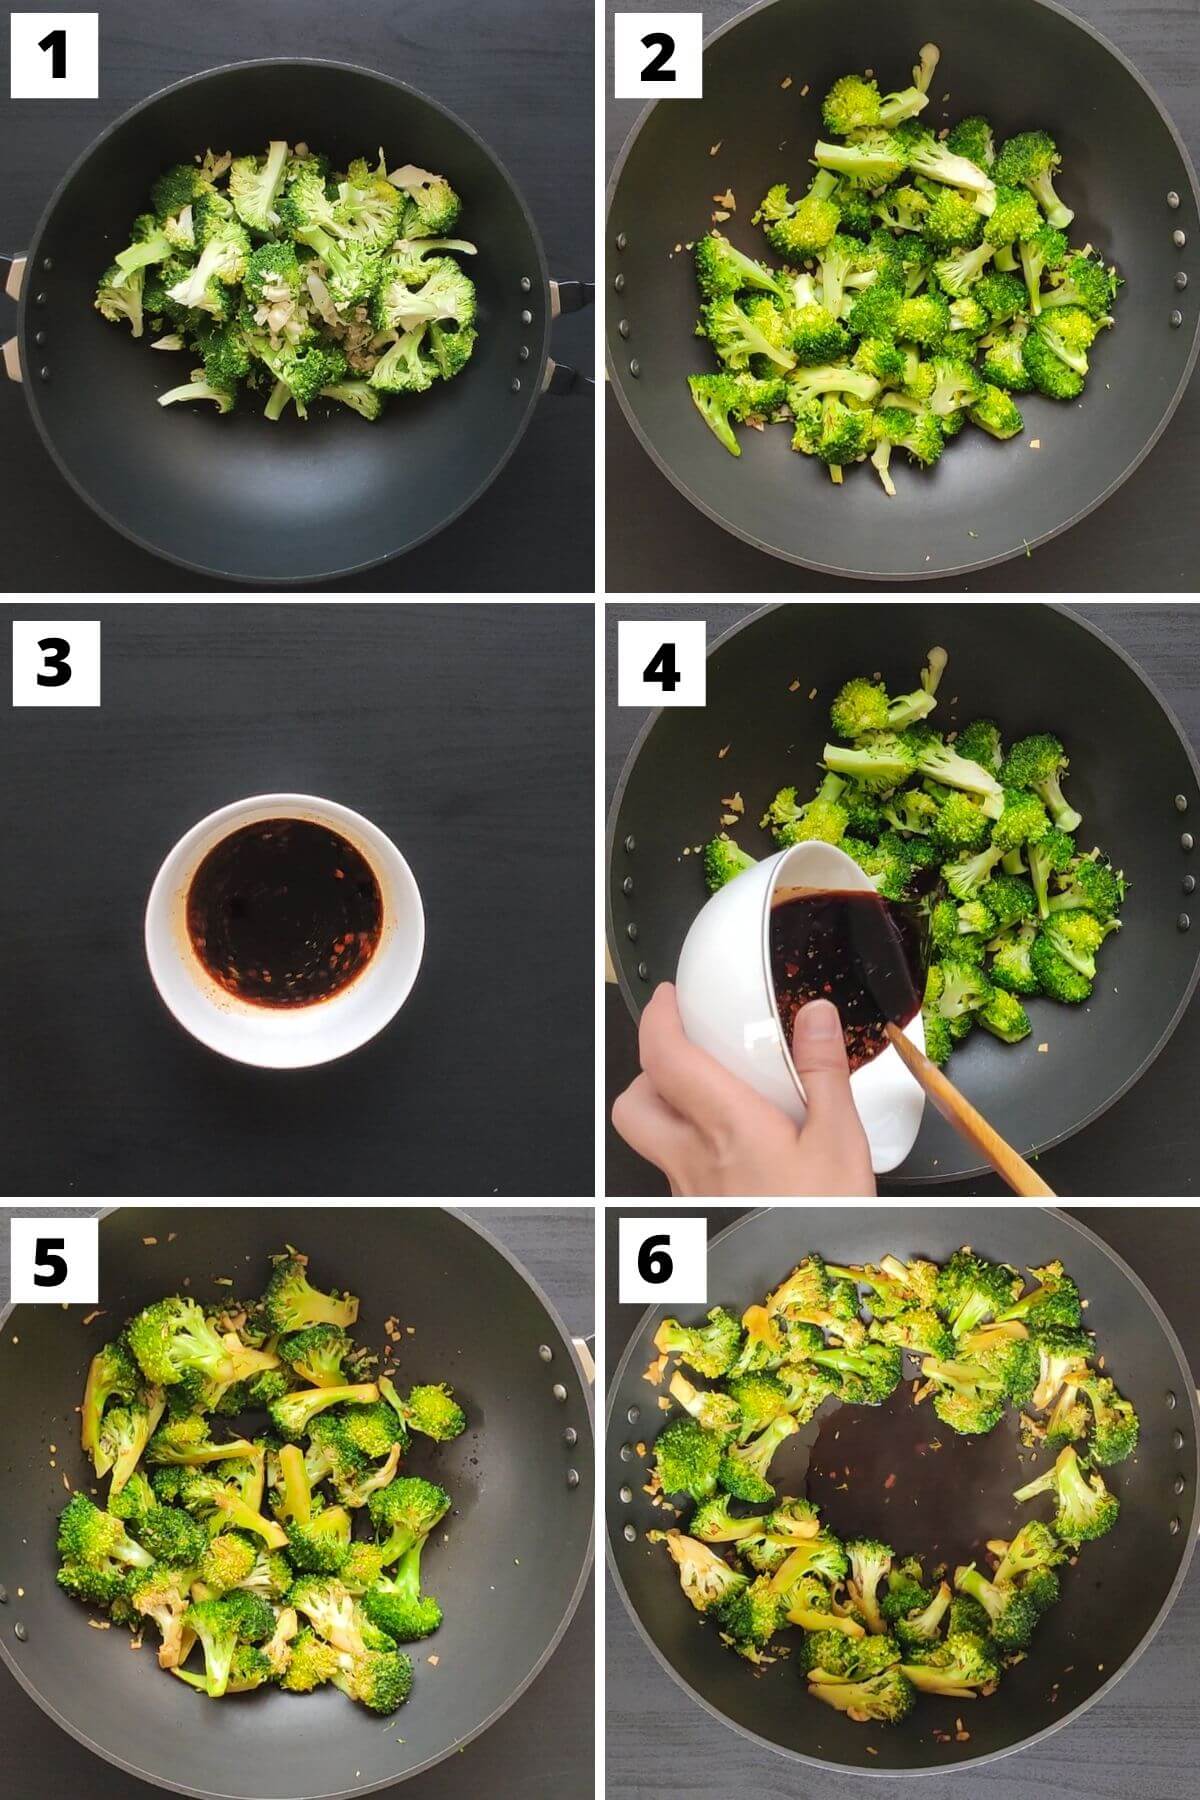 Steps 1 to 6 for making Asian style garlic broccoli